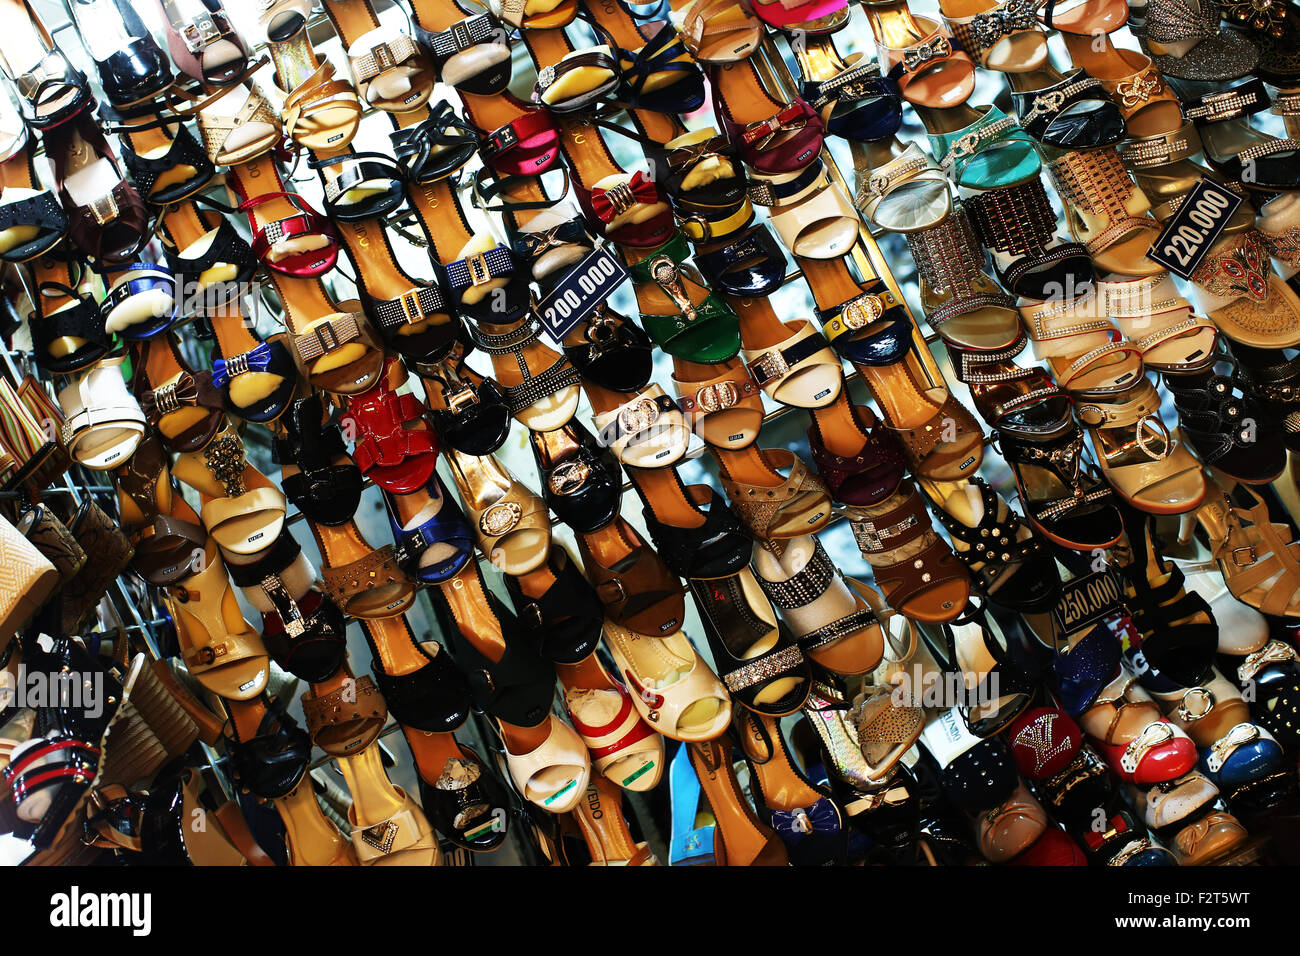 Lots of shoes for sale Stock Photo - Alamy